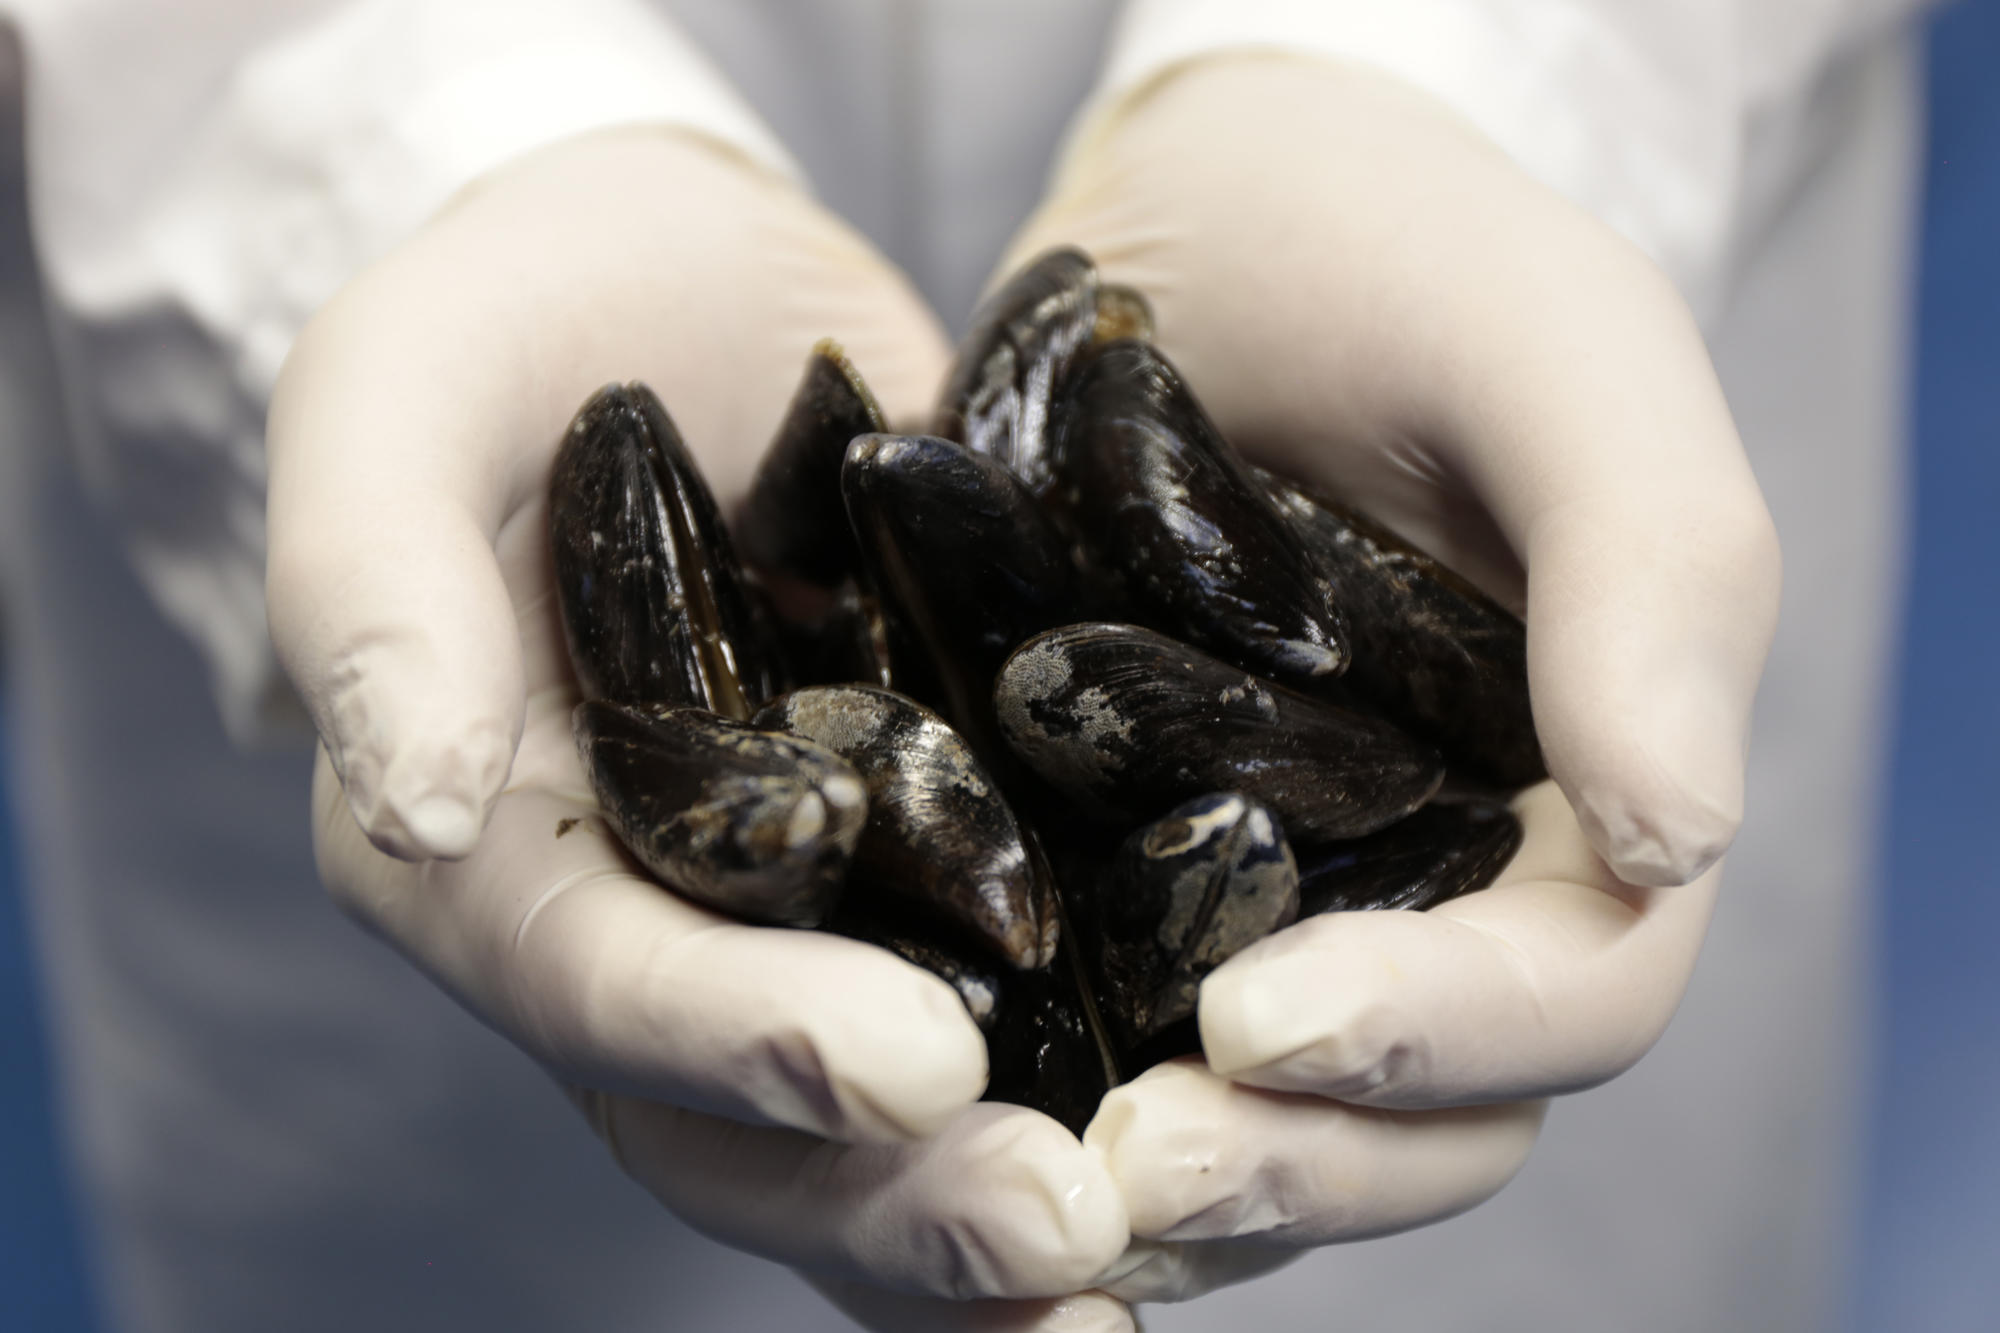 The glue produced by mussels serves as a model for a biogenic adhesive which, it is hoped, will be able to bind together skin, tissue, and even bone.